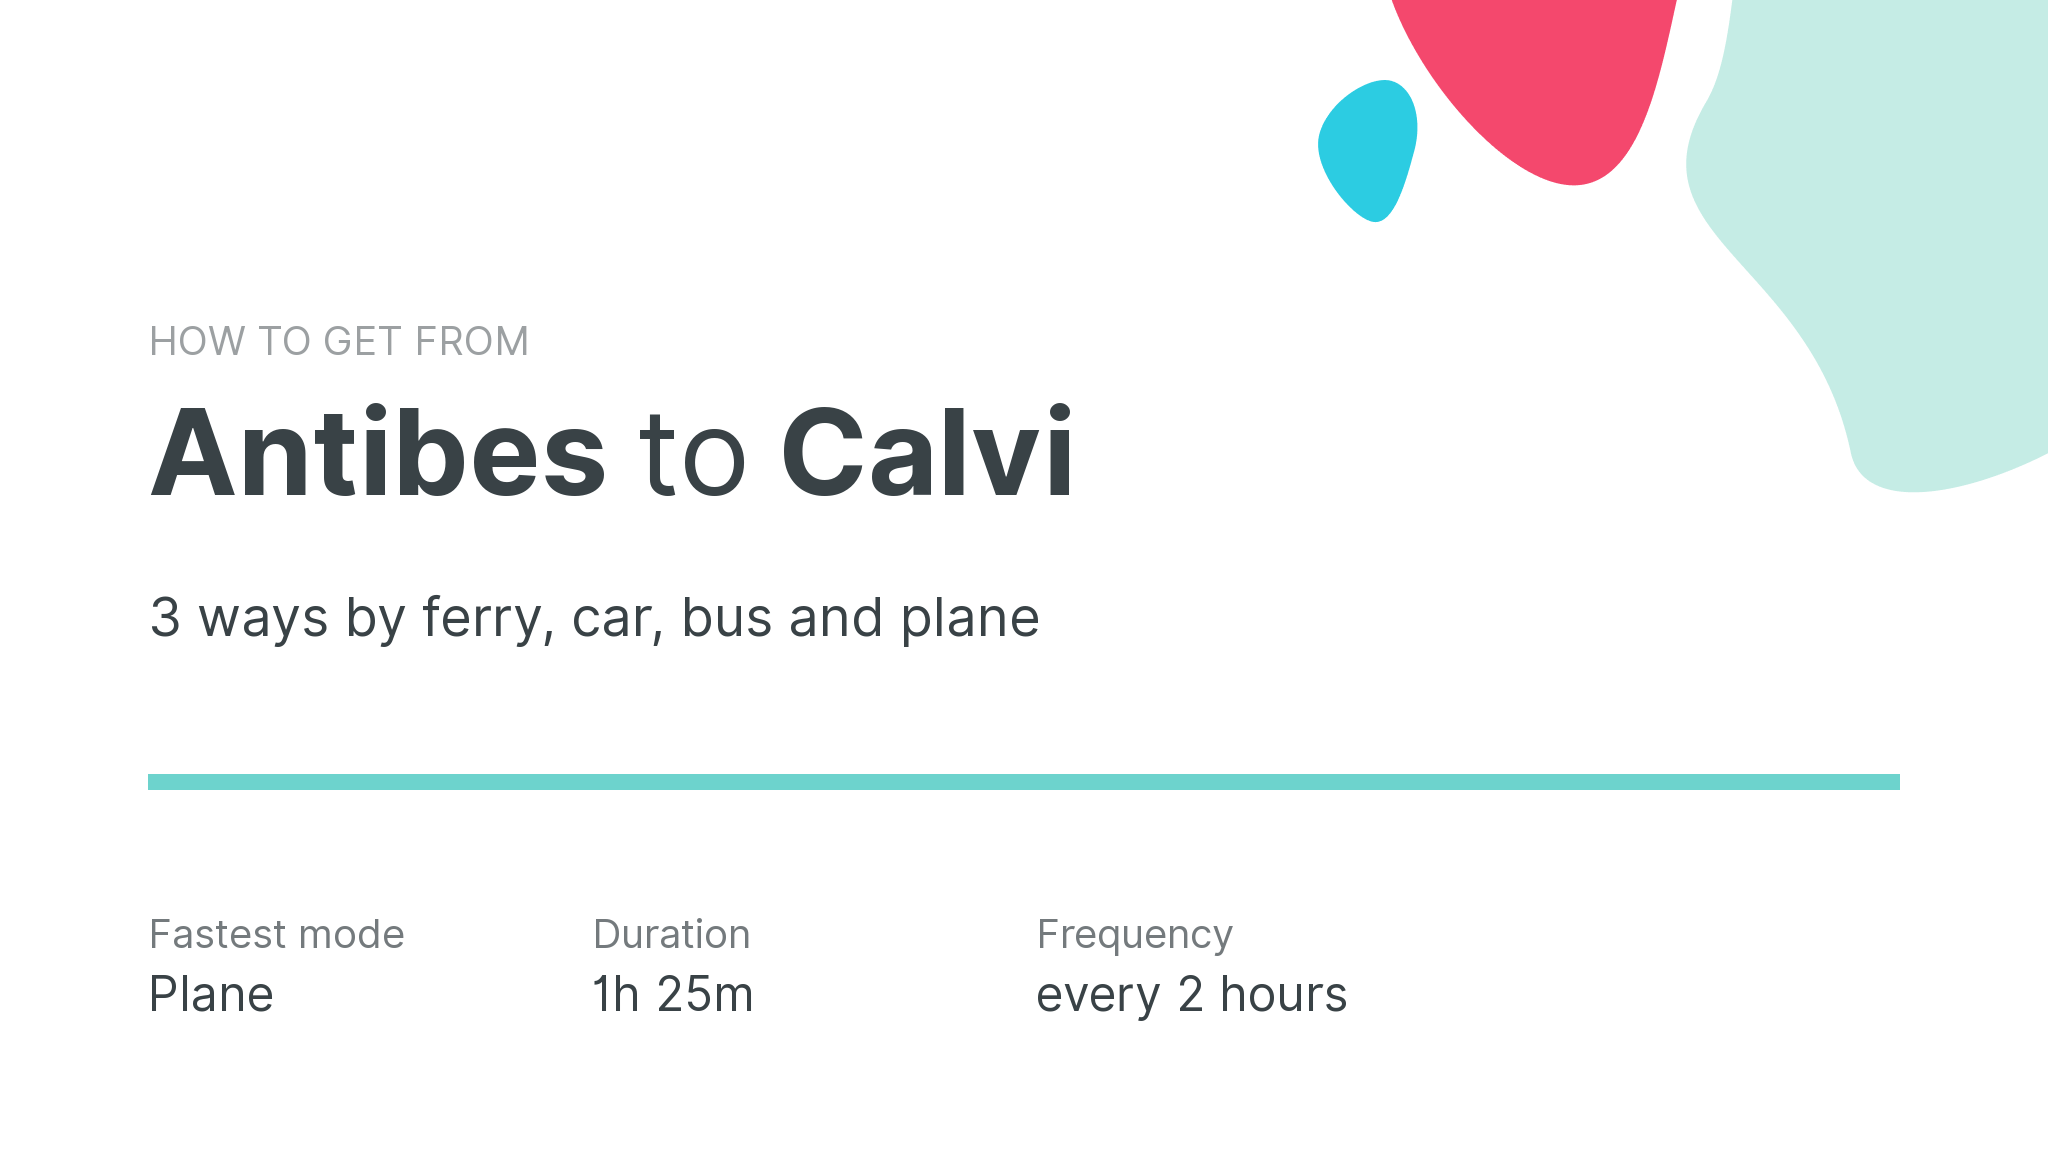 How do I get from Antibes to Calvi